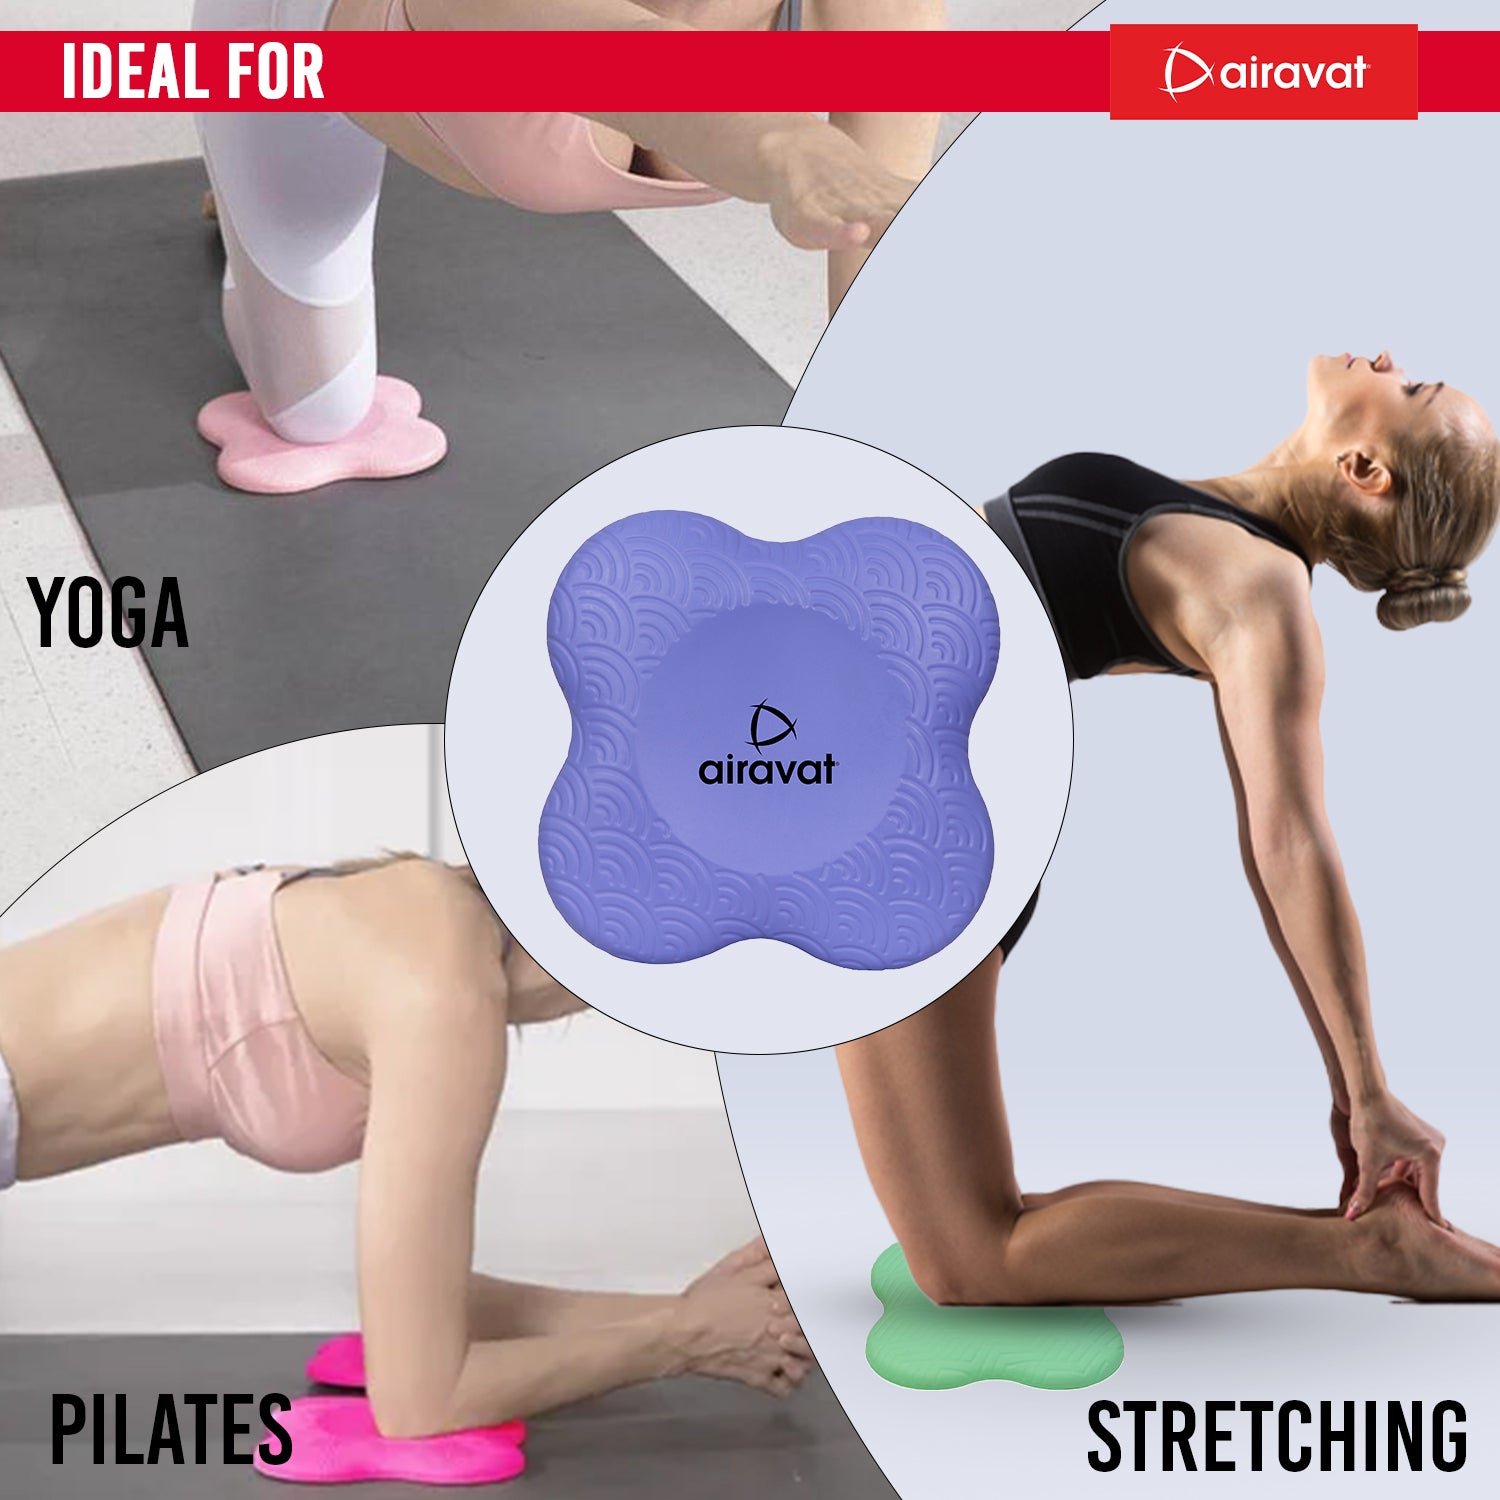 EvriFit Exercise and Yoga Knee Pads, Reduce Pain and Pressure